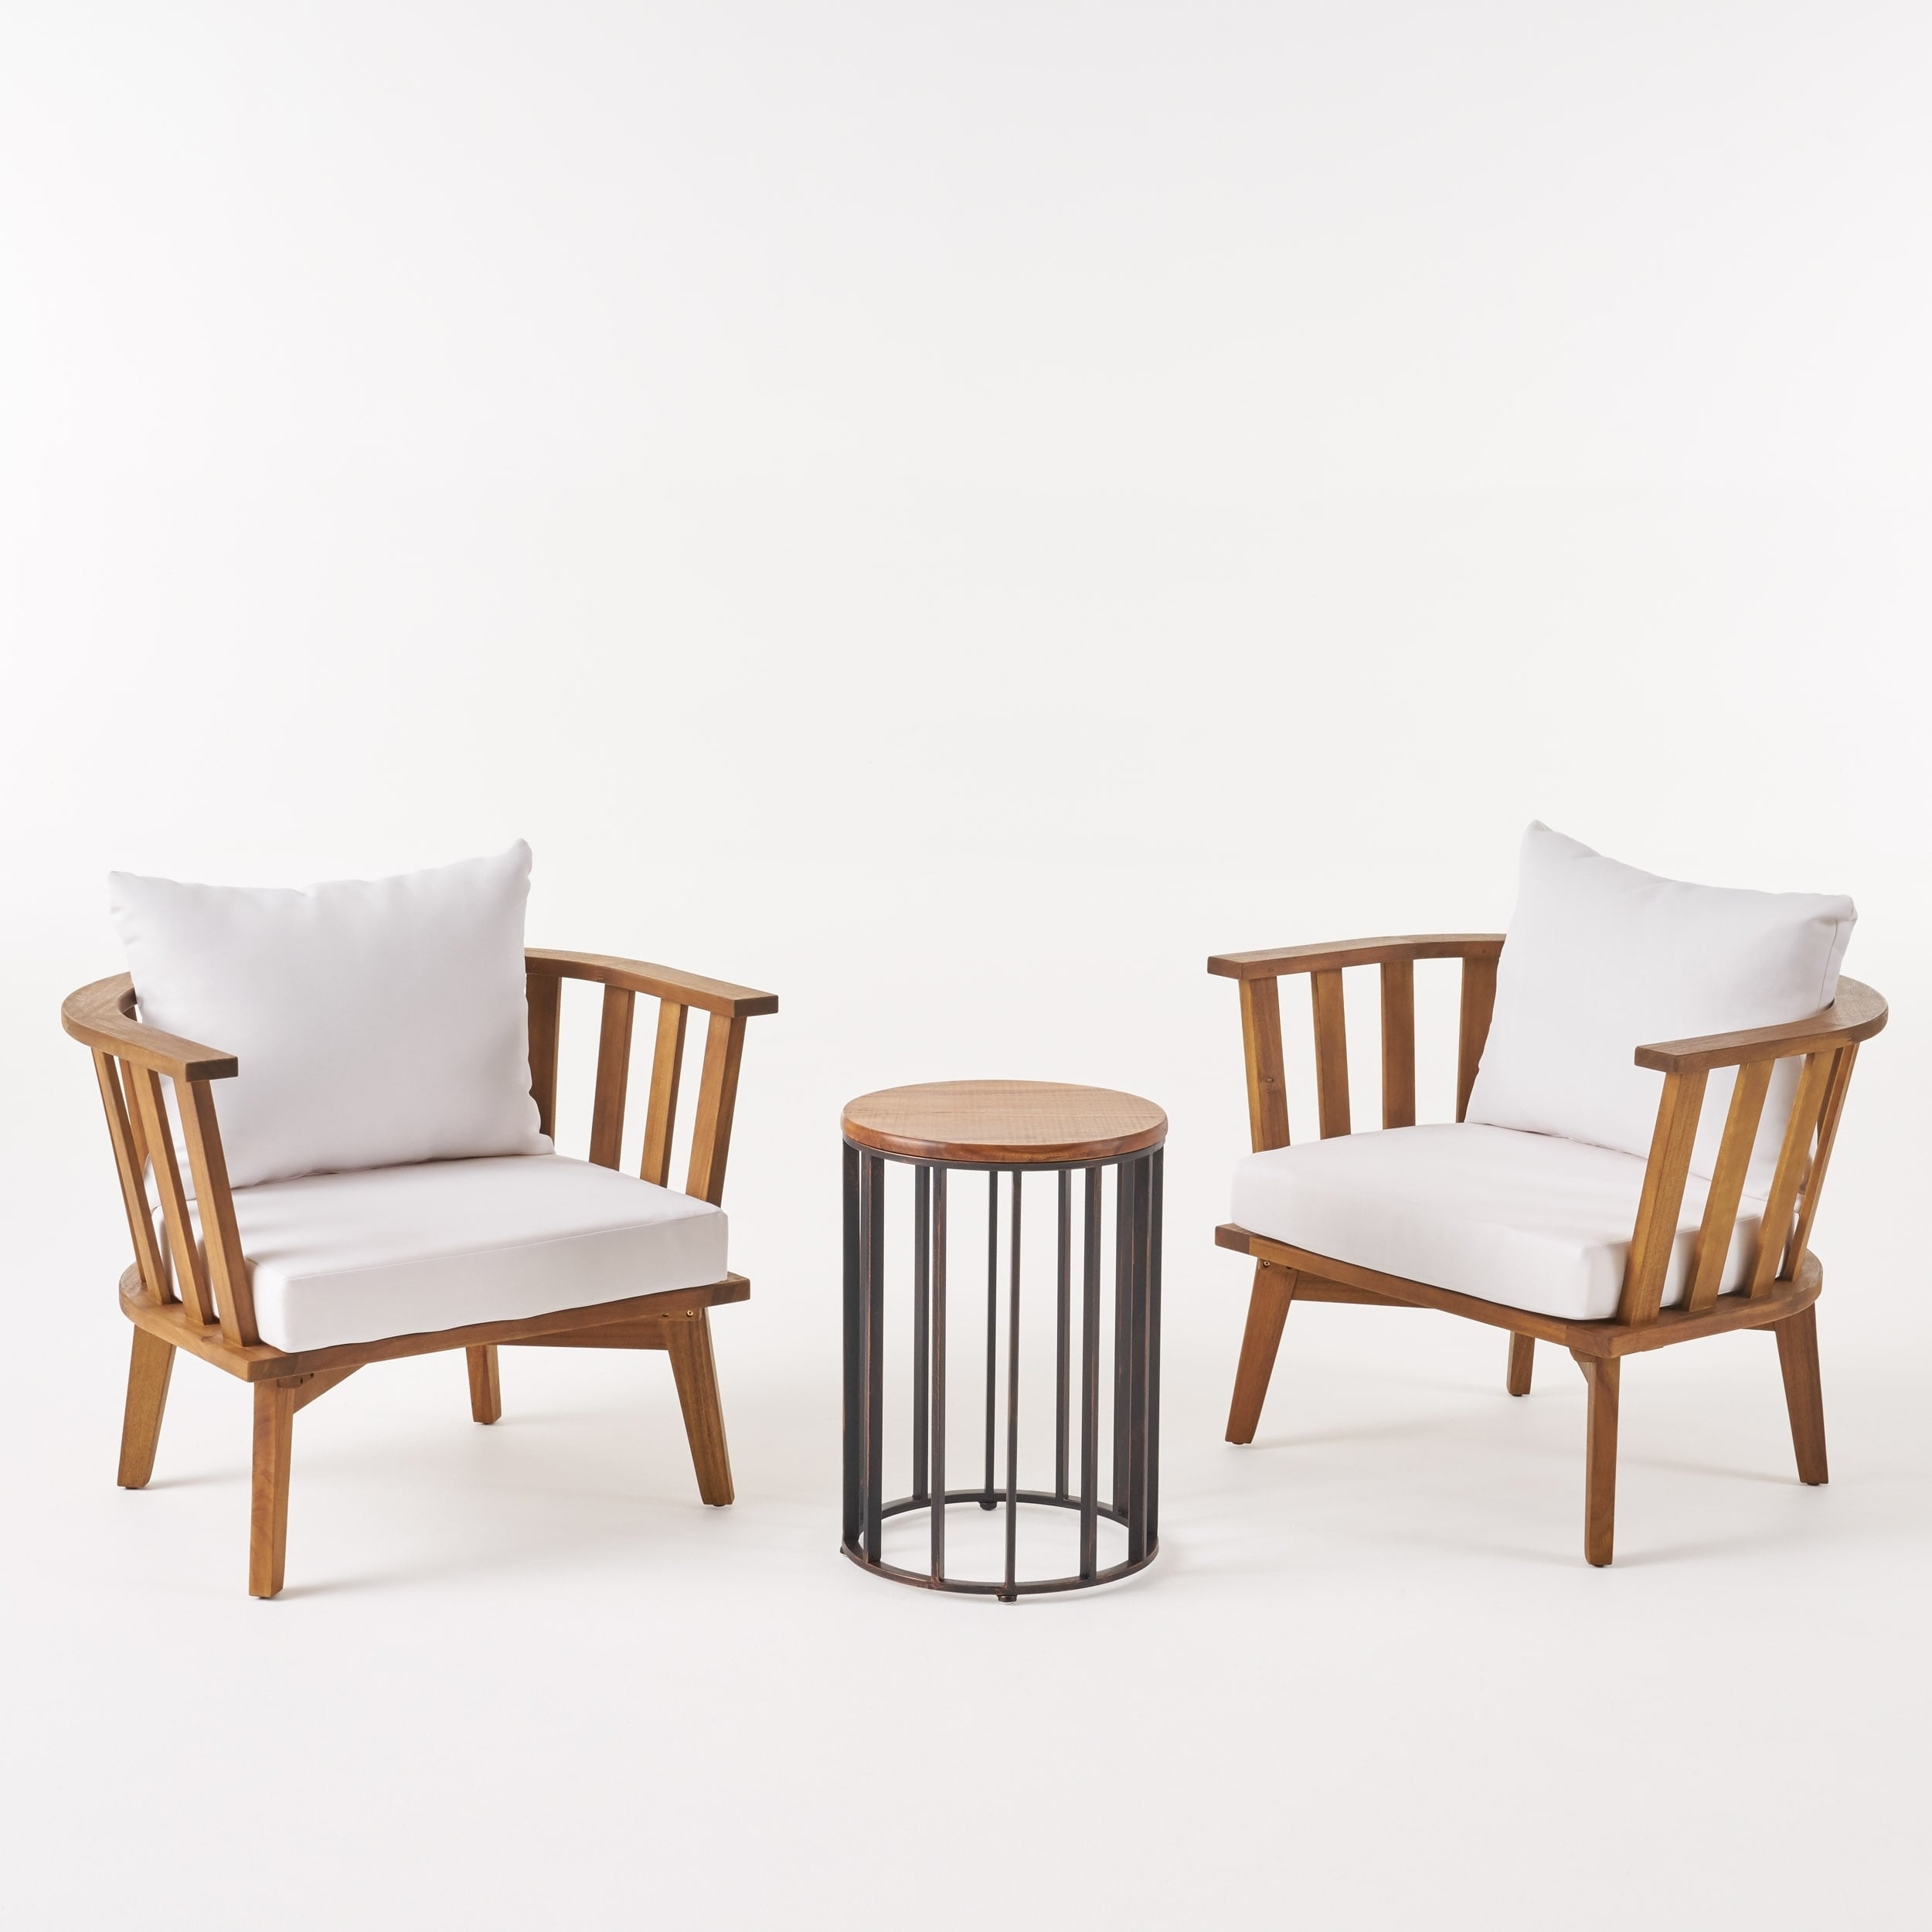 Horatio Outdoor 2 Seater Acacia Wood Club Chairs And Side Table Set By Christopher Knight Home